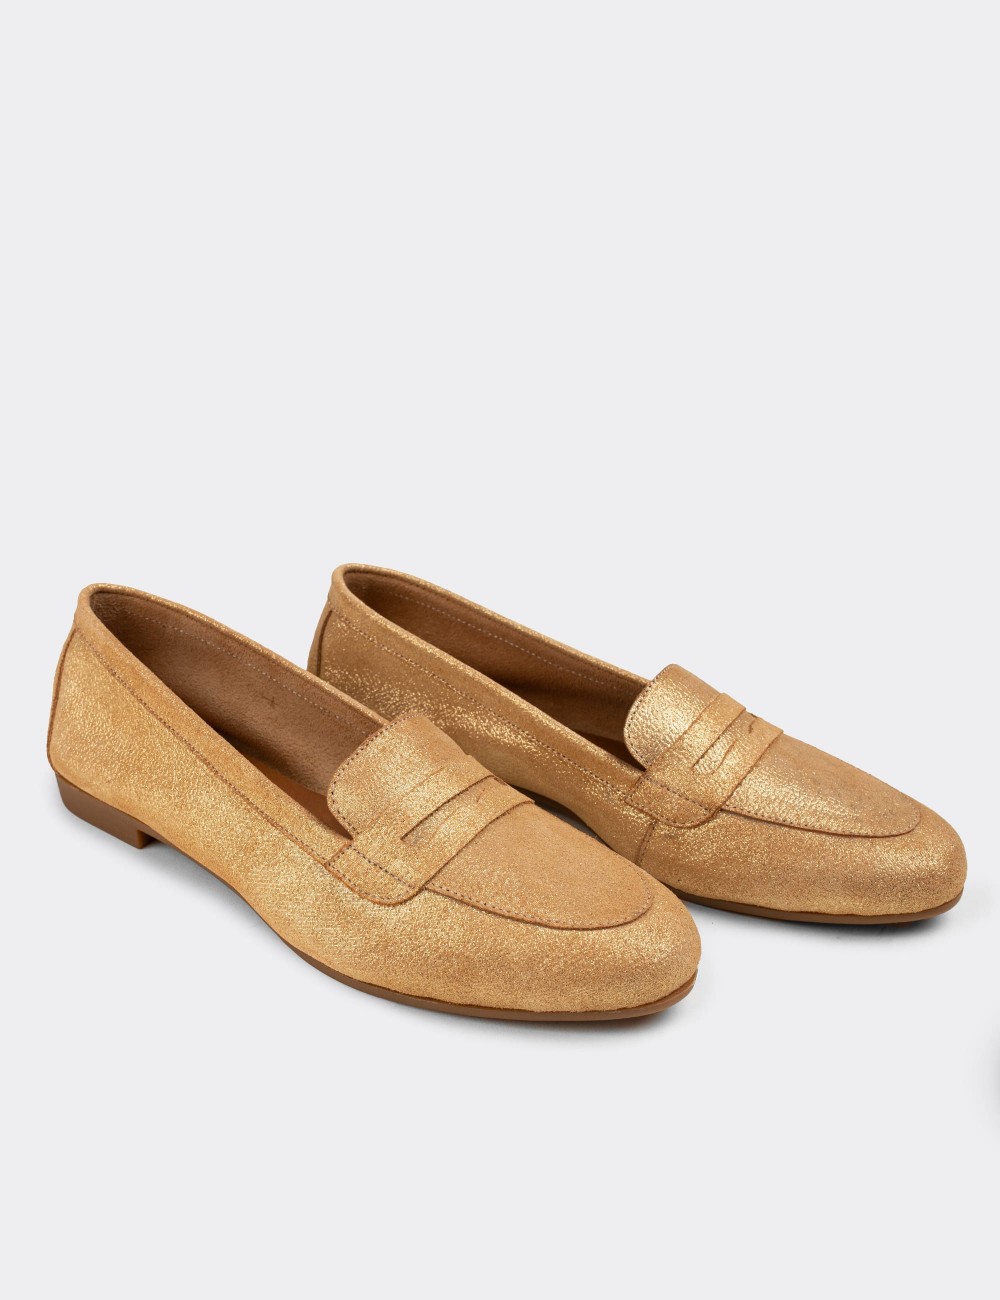 Gold Suede Leather Loafers - E3202ZALTC01